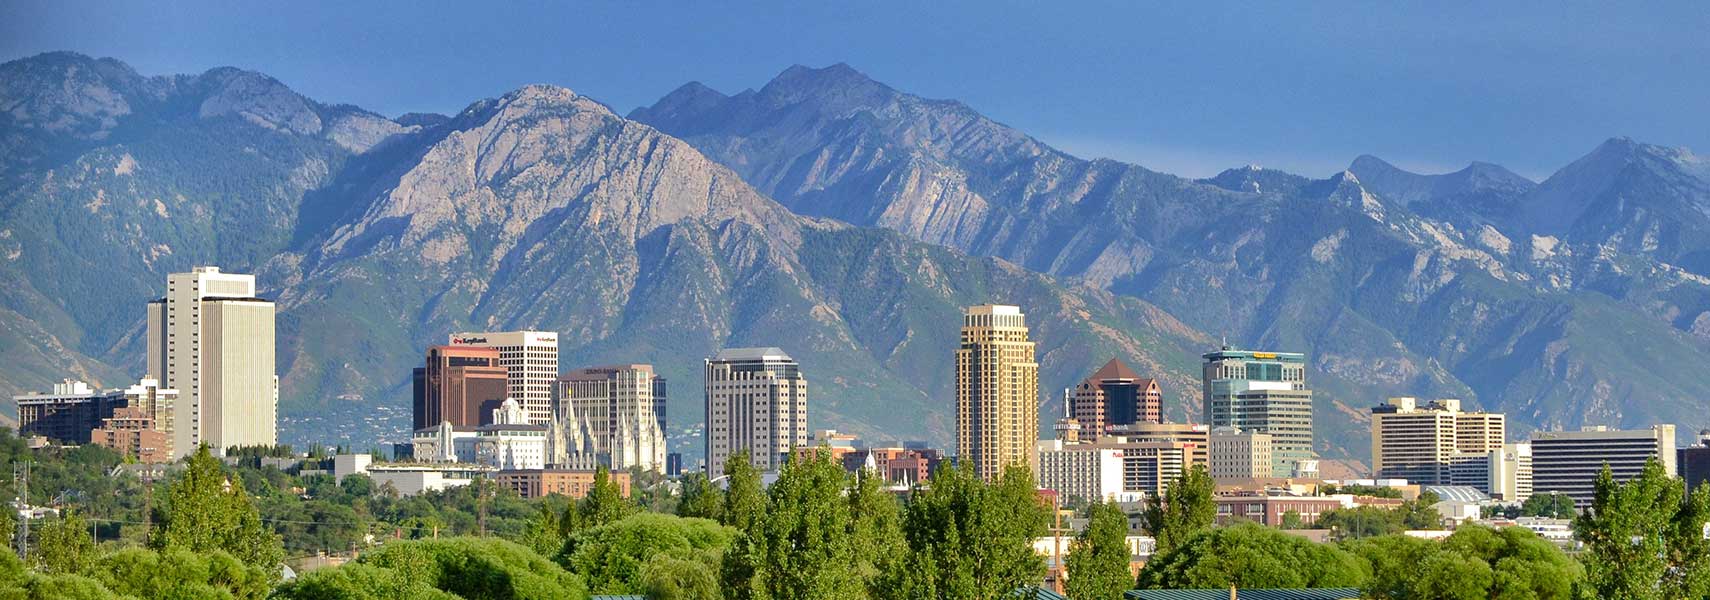 Skyline of Salt Lake City with  Wasatch mountains, Utah.